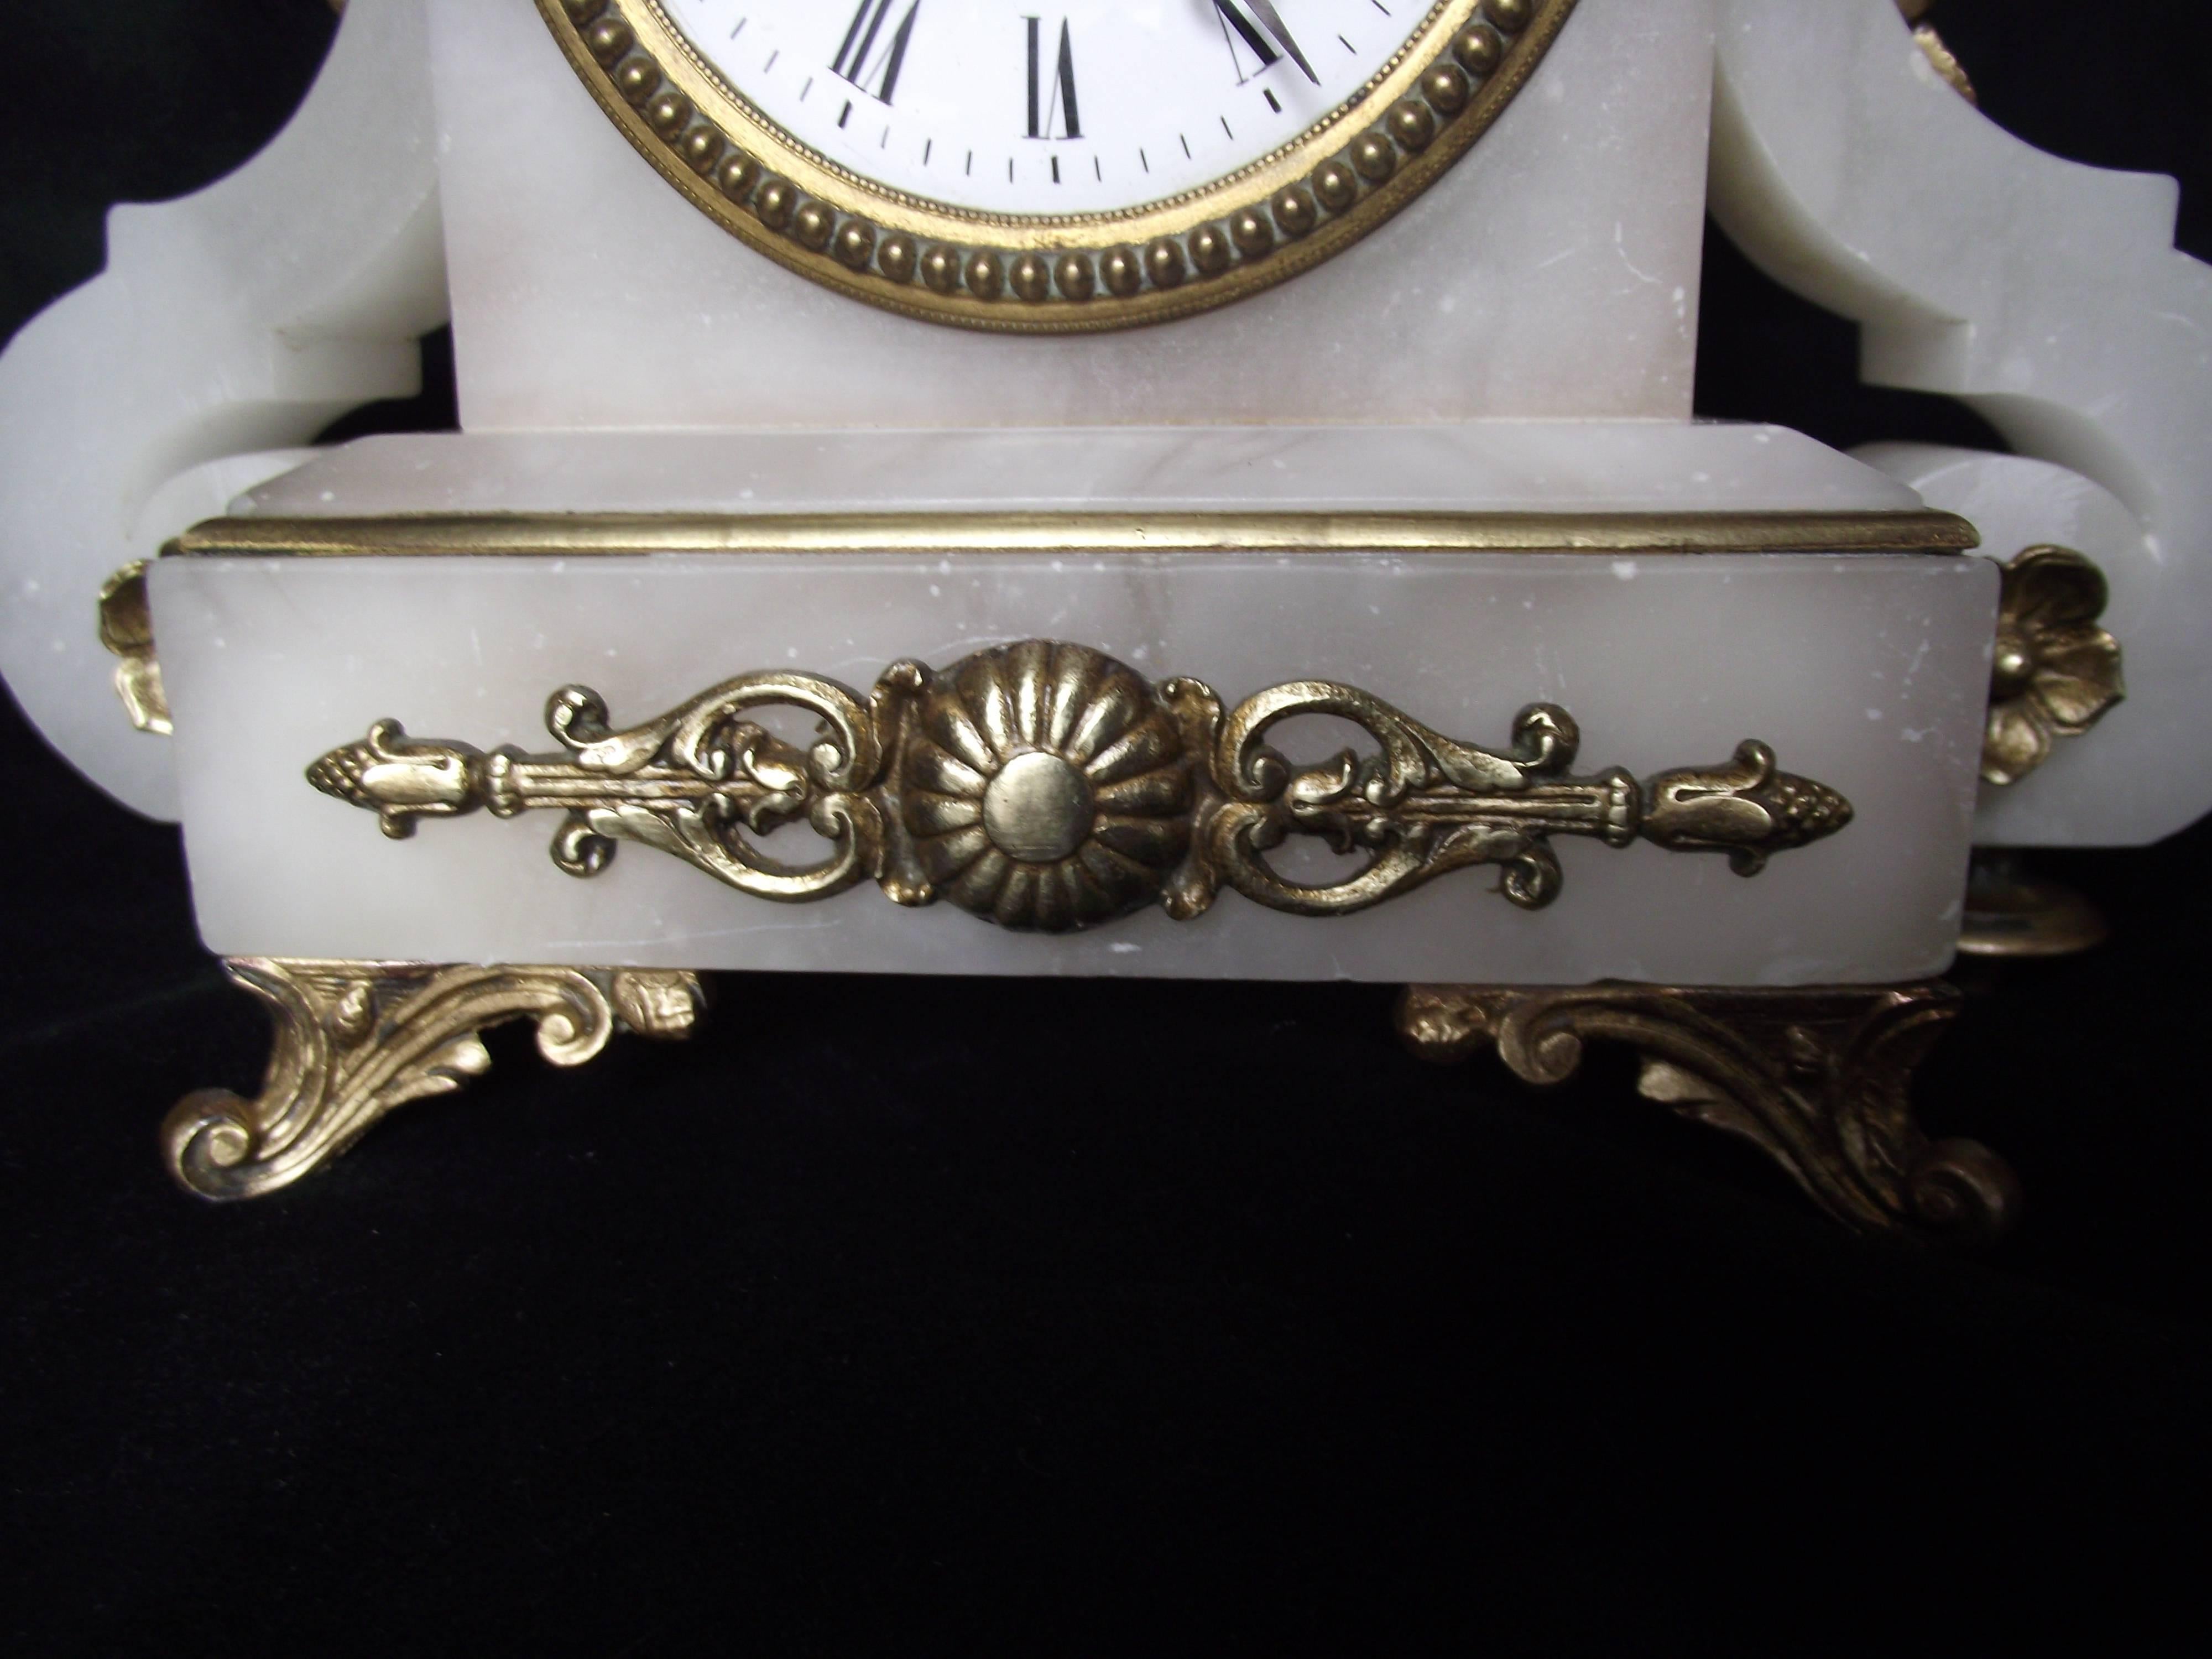 This beautiful Victorian carved alabaster clock features a bust of a beautiful woman on the top.

The alabaster is in very good shape for it's age. It has a few little flea bites here and there but they do not detract from the beauty of the